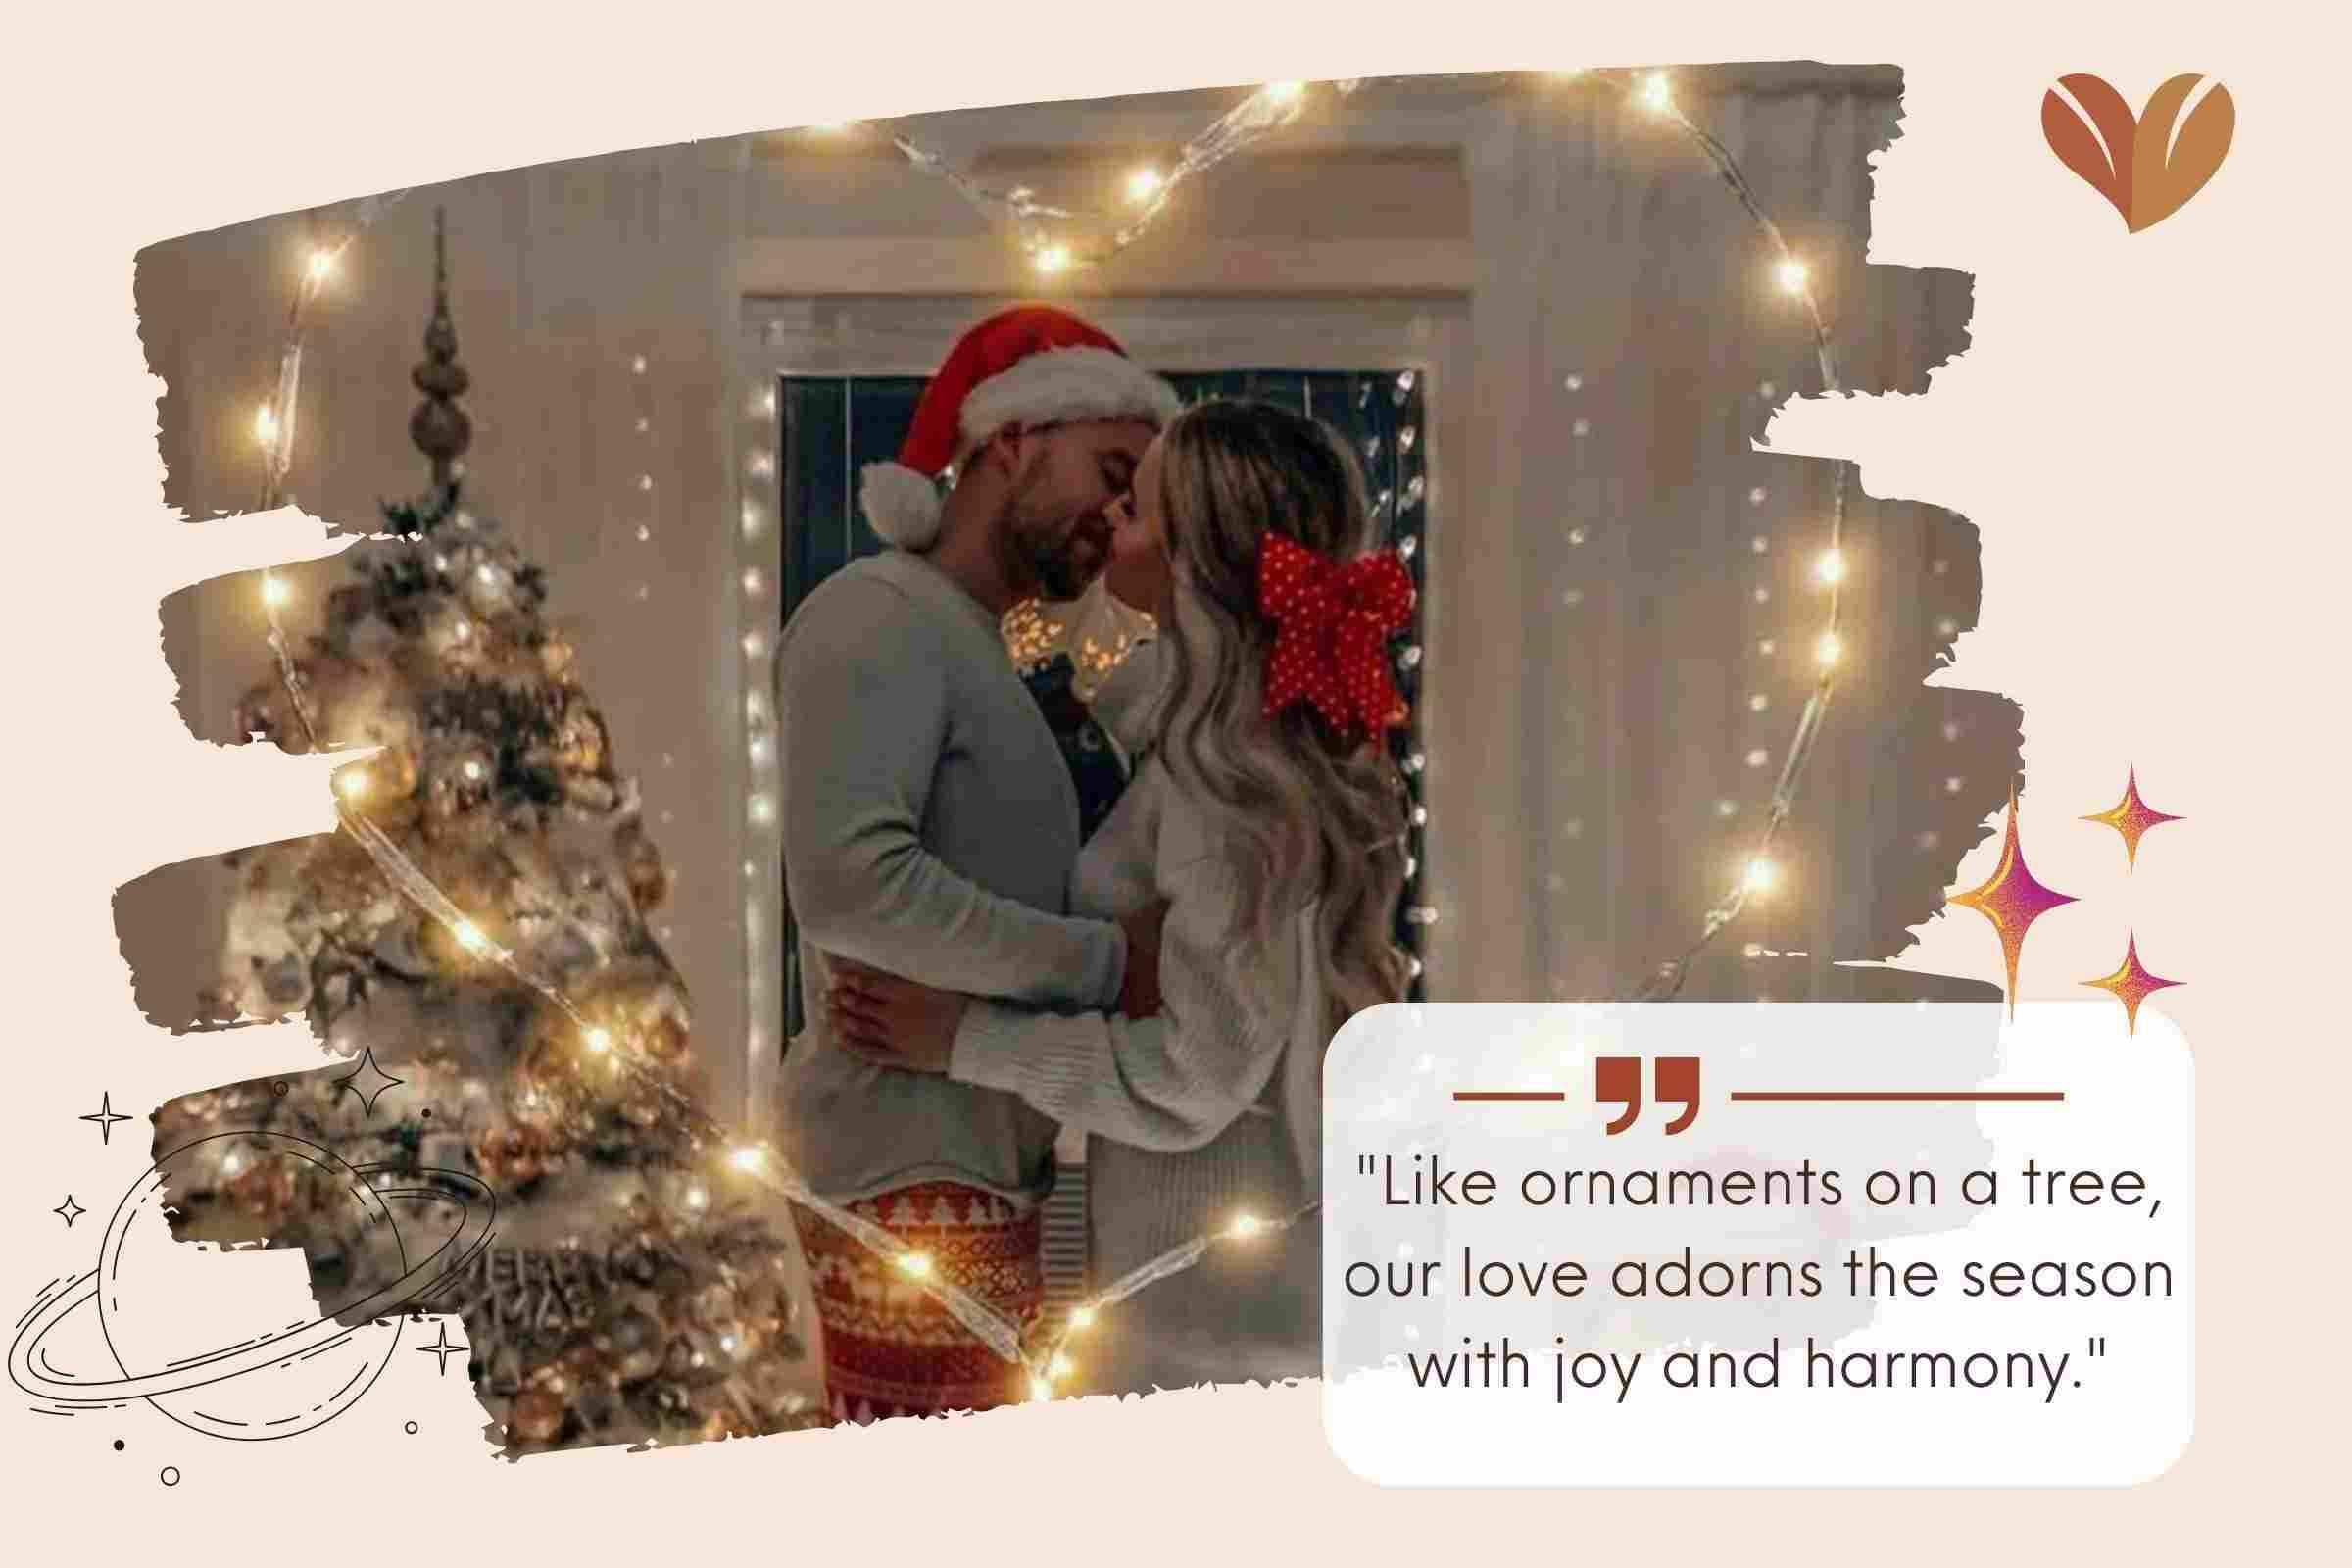 "Like ornaments on a tree, our love adorns the season with joy and harmony."